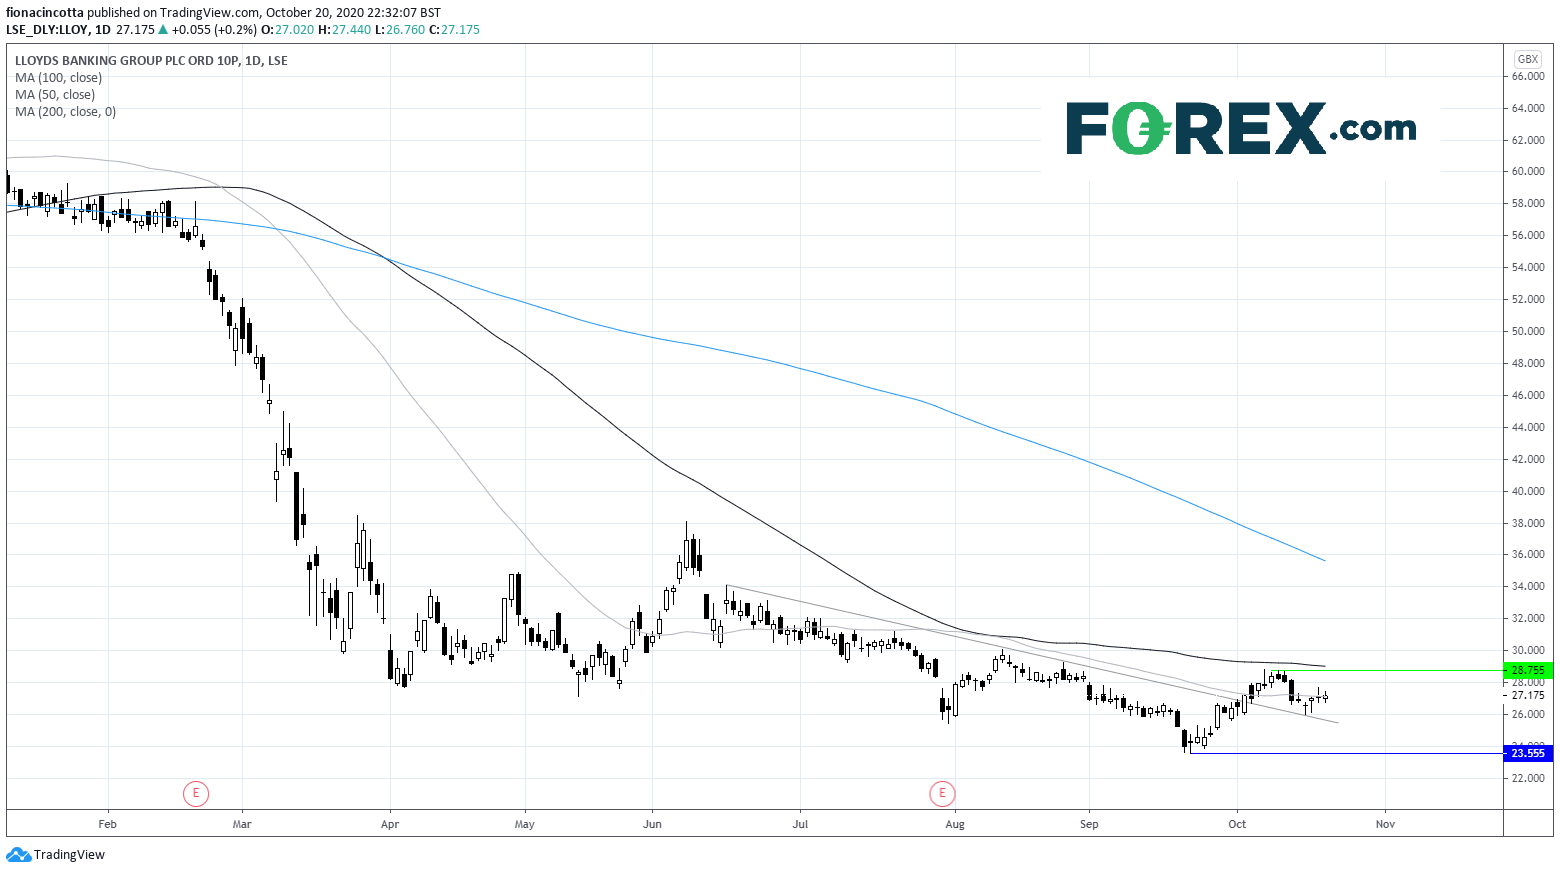 Market chart demonstrating how Lloyds bank earnings to stabilise. Published in October 2020 by FOREX.com